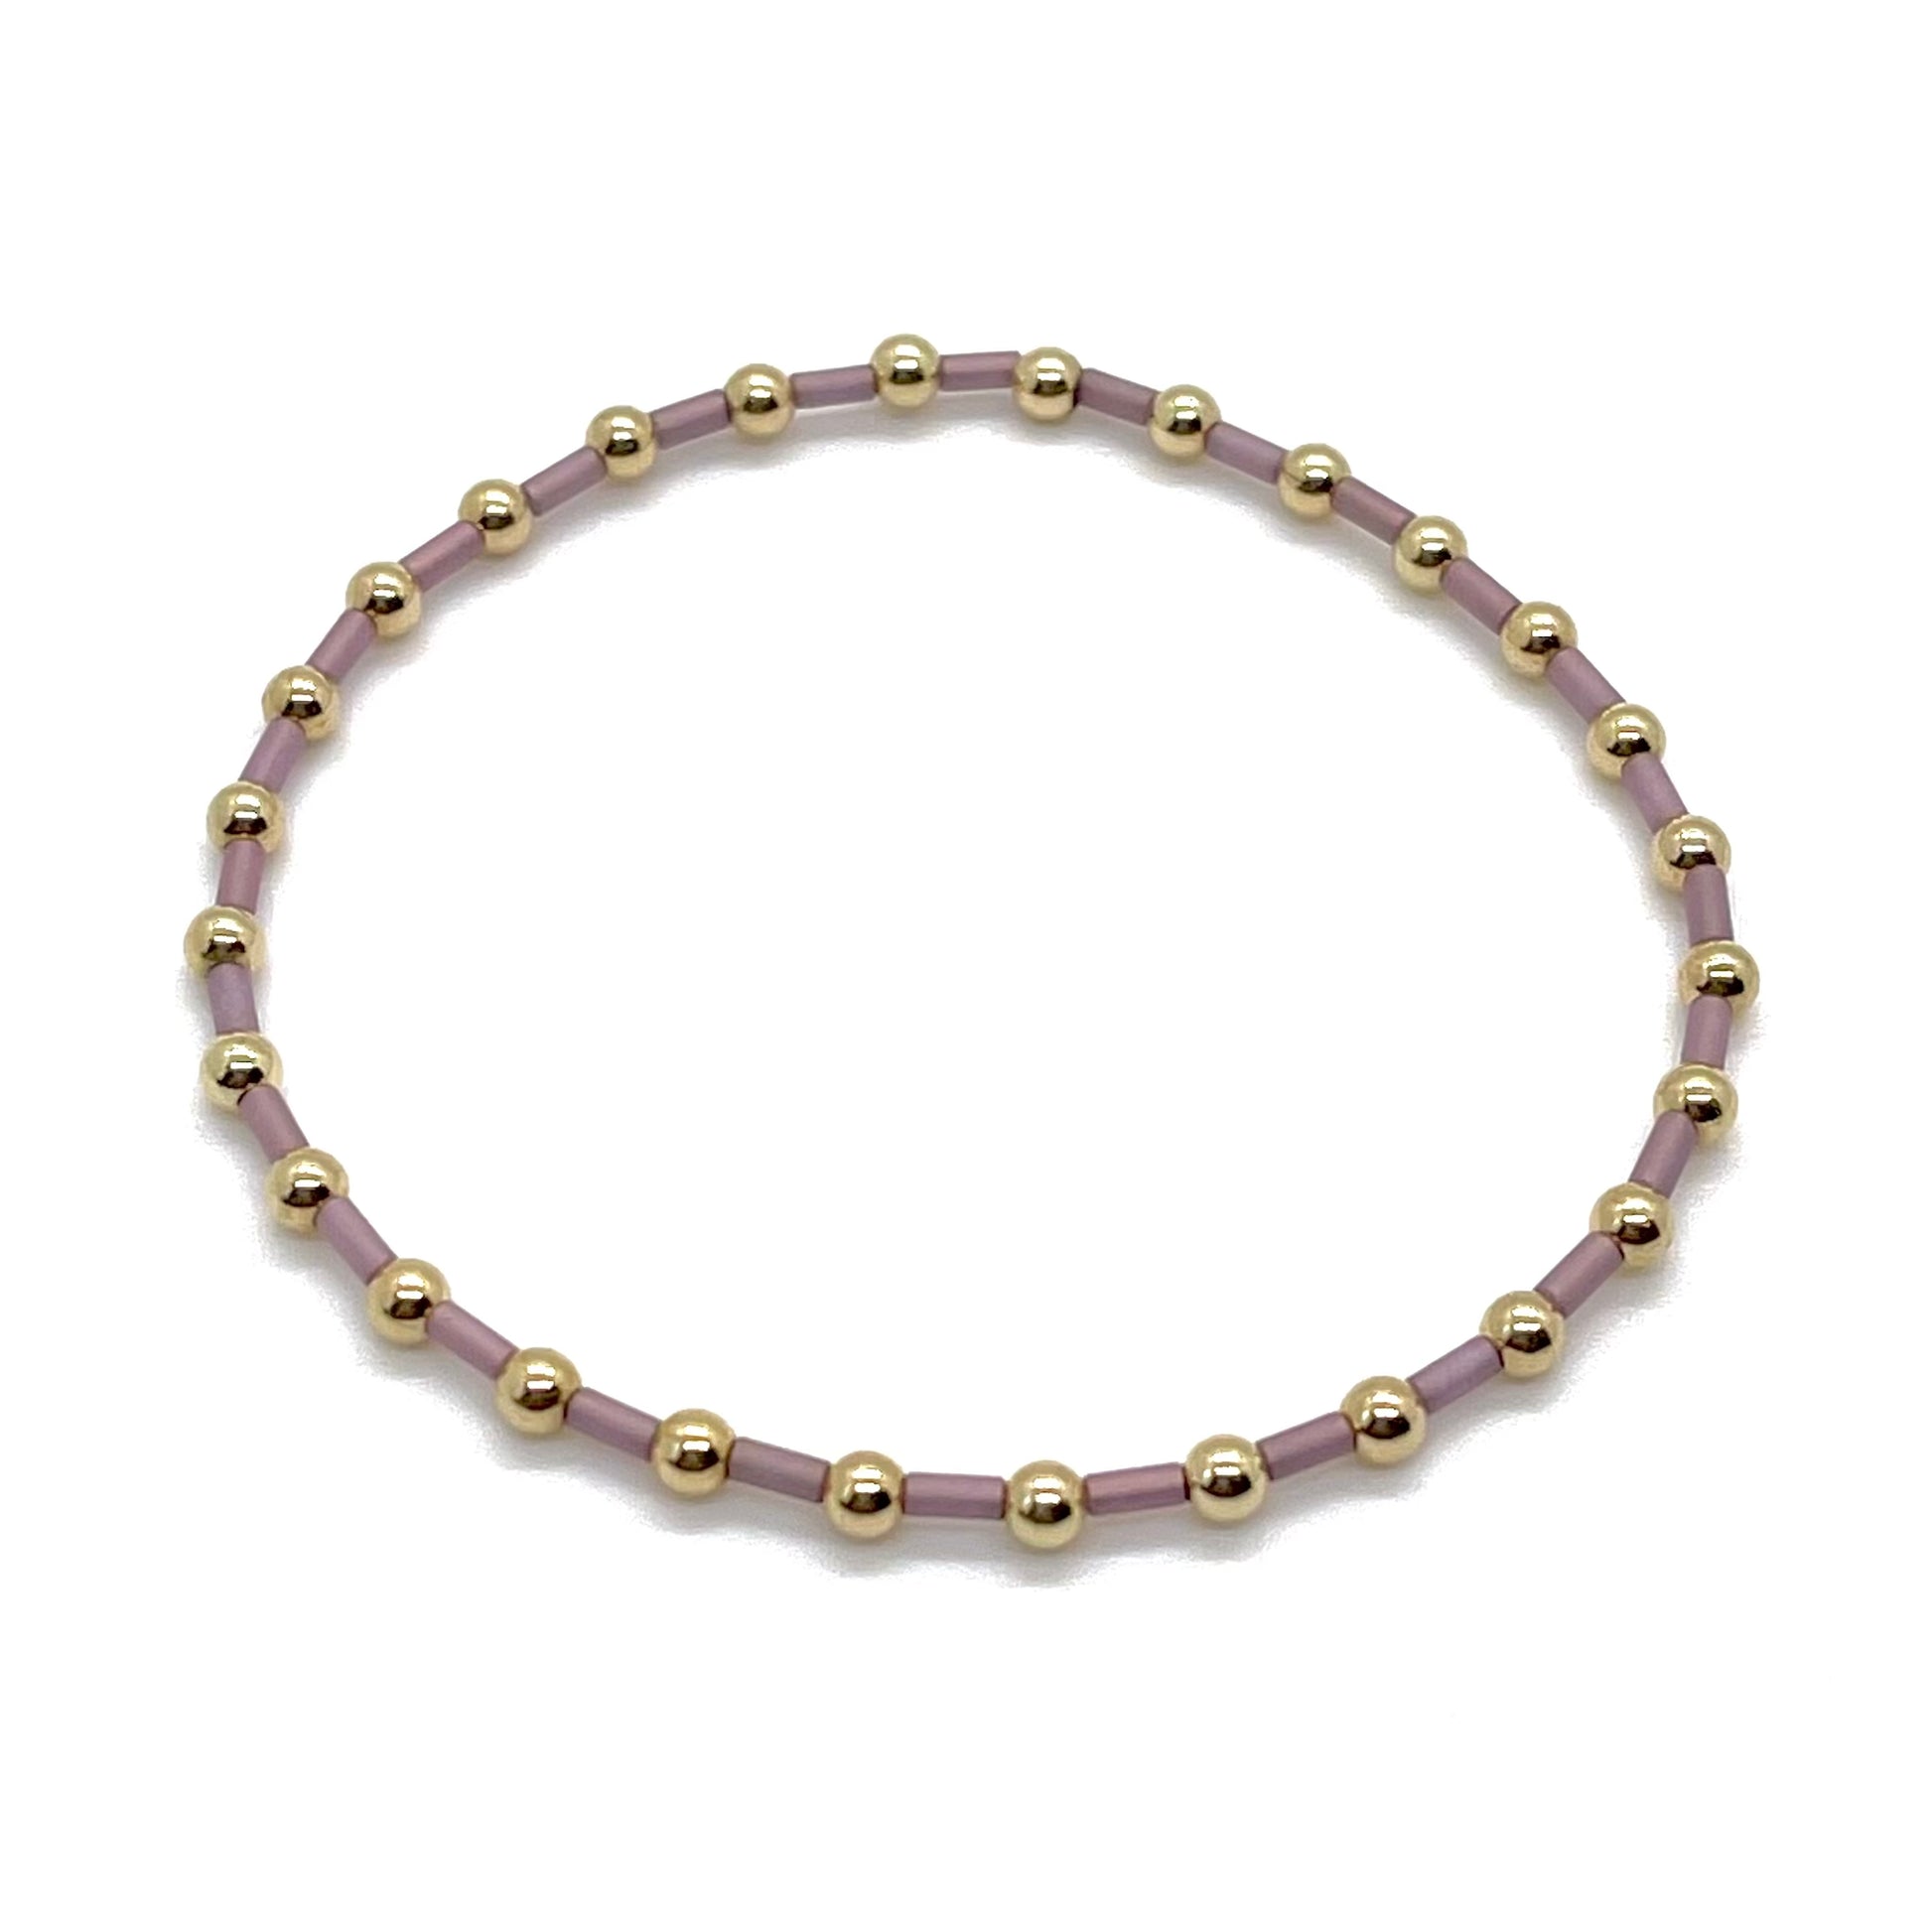 3mm gold filled bracelet with mauve bugle seed beads on elastic stretch cord.